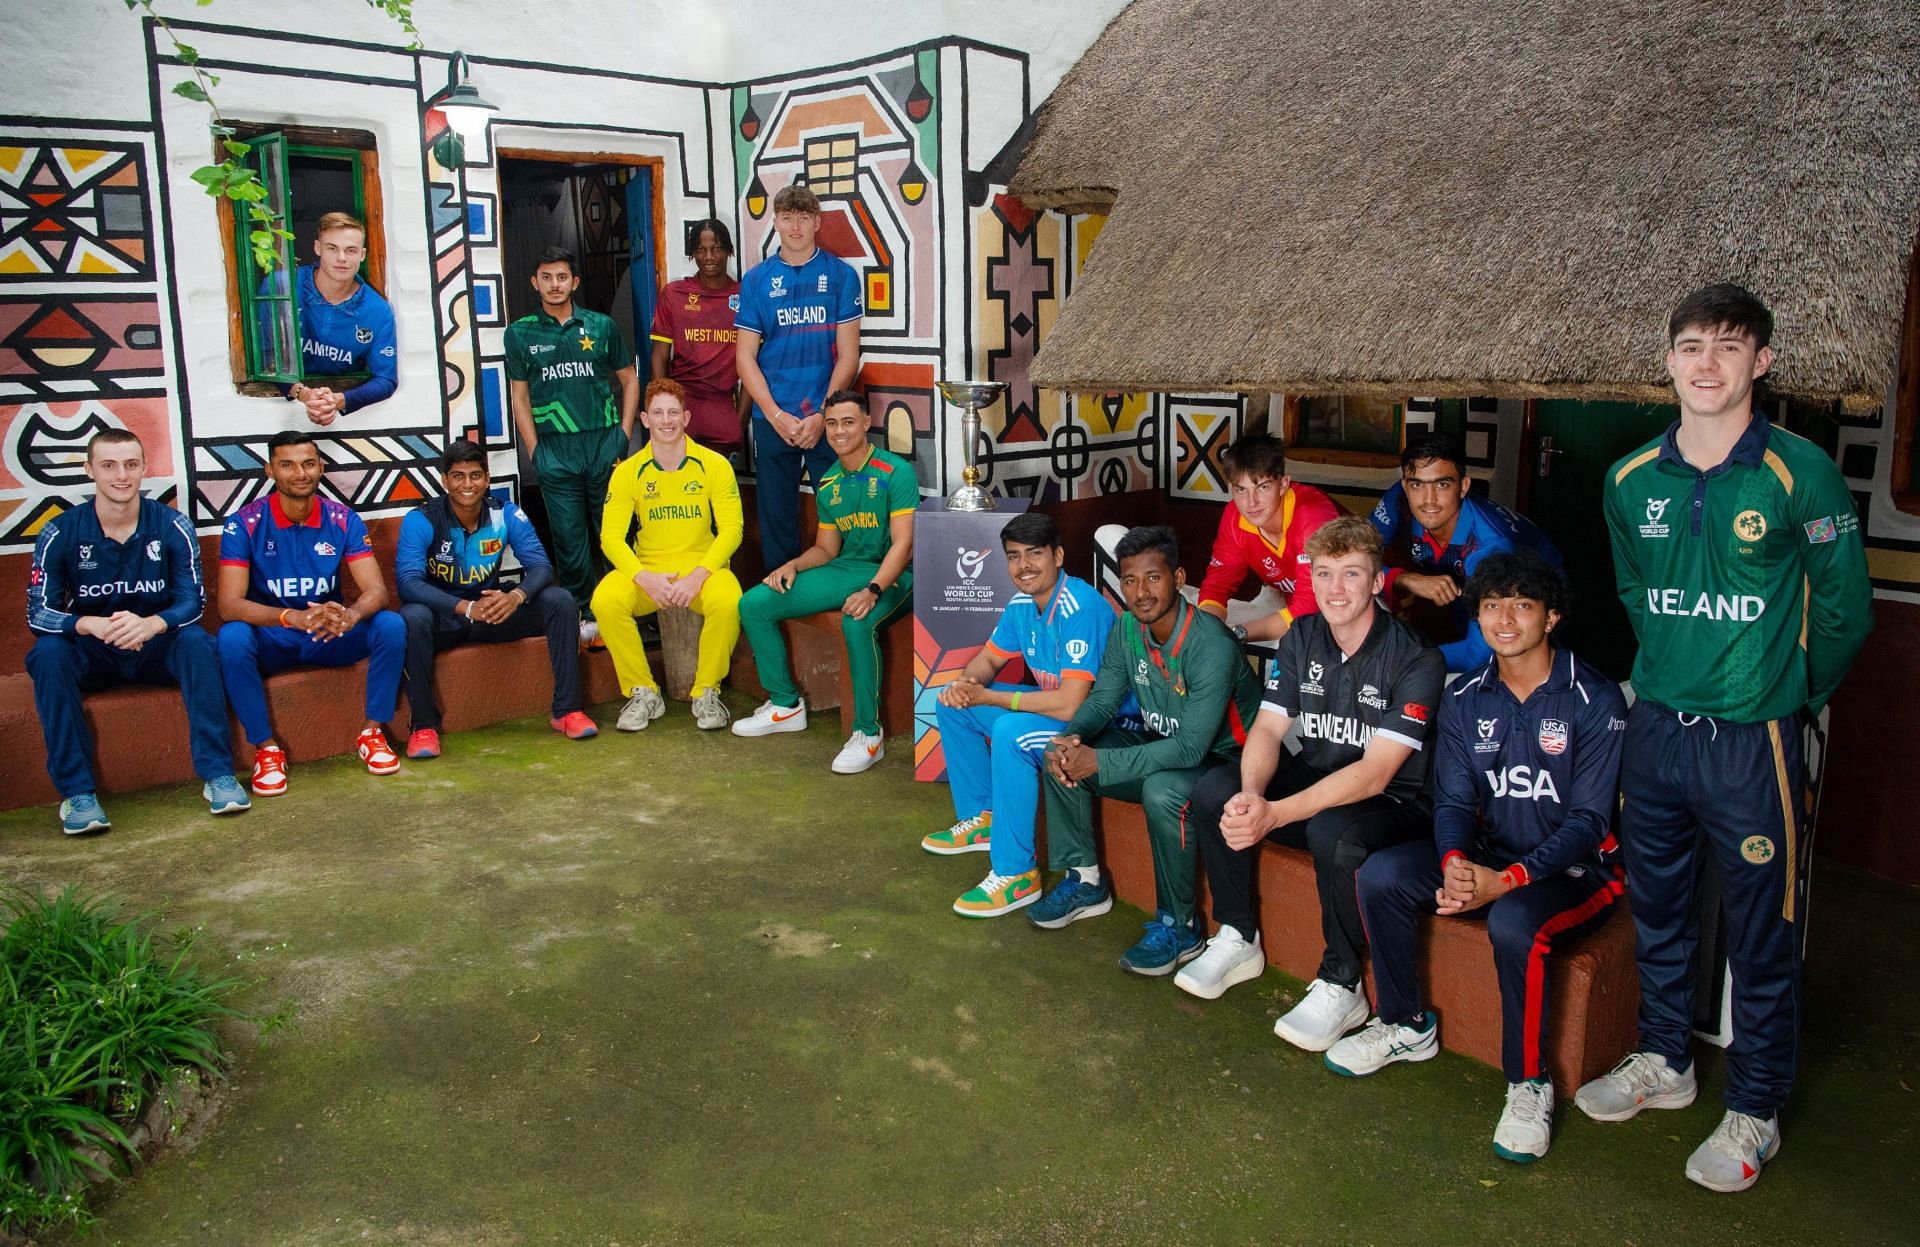 U19 Cricket World Cup Captains posing with trophy (Credits: ICC on X)